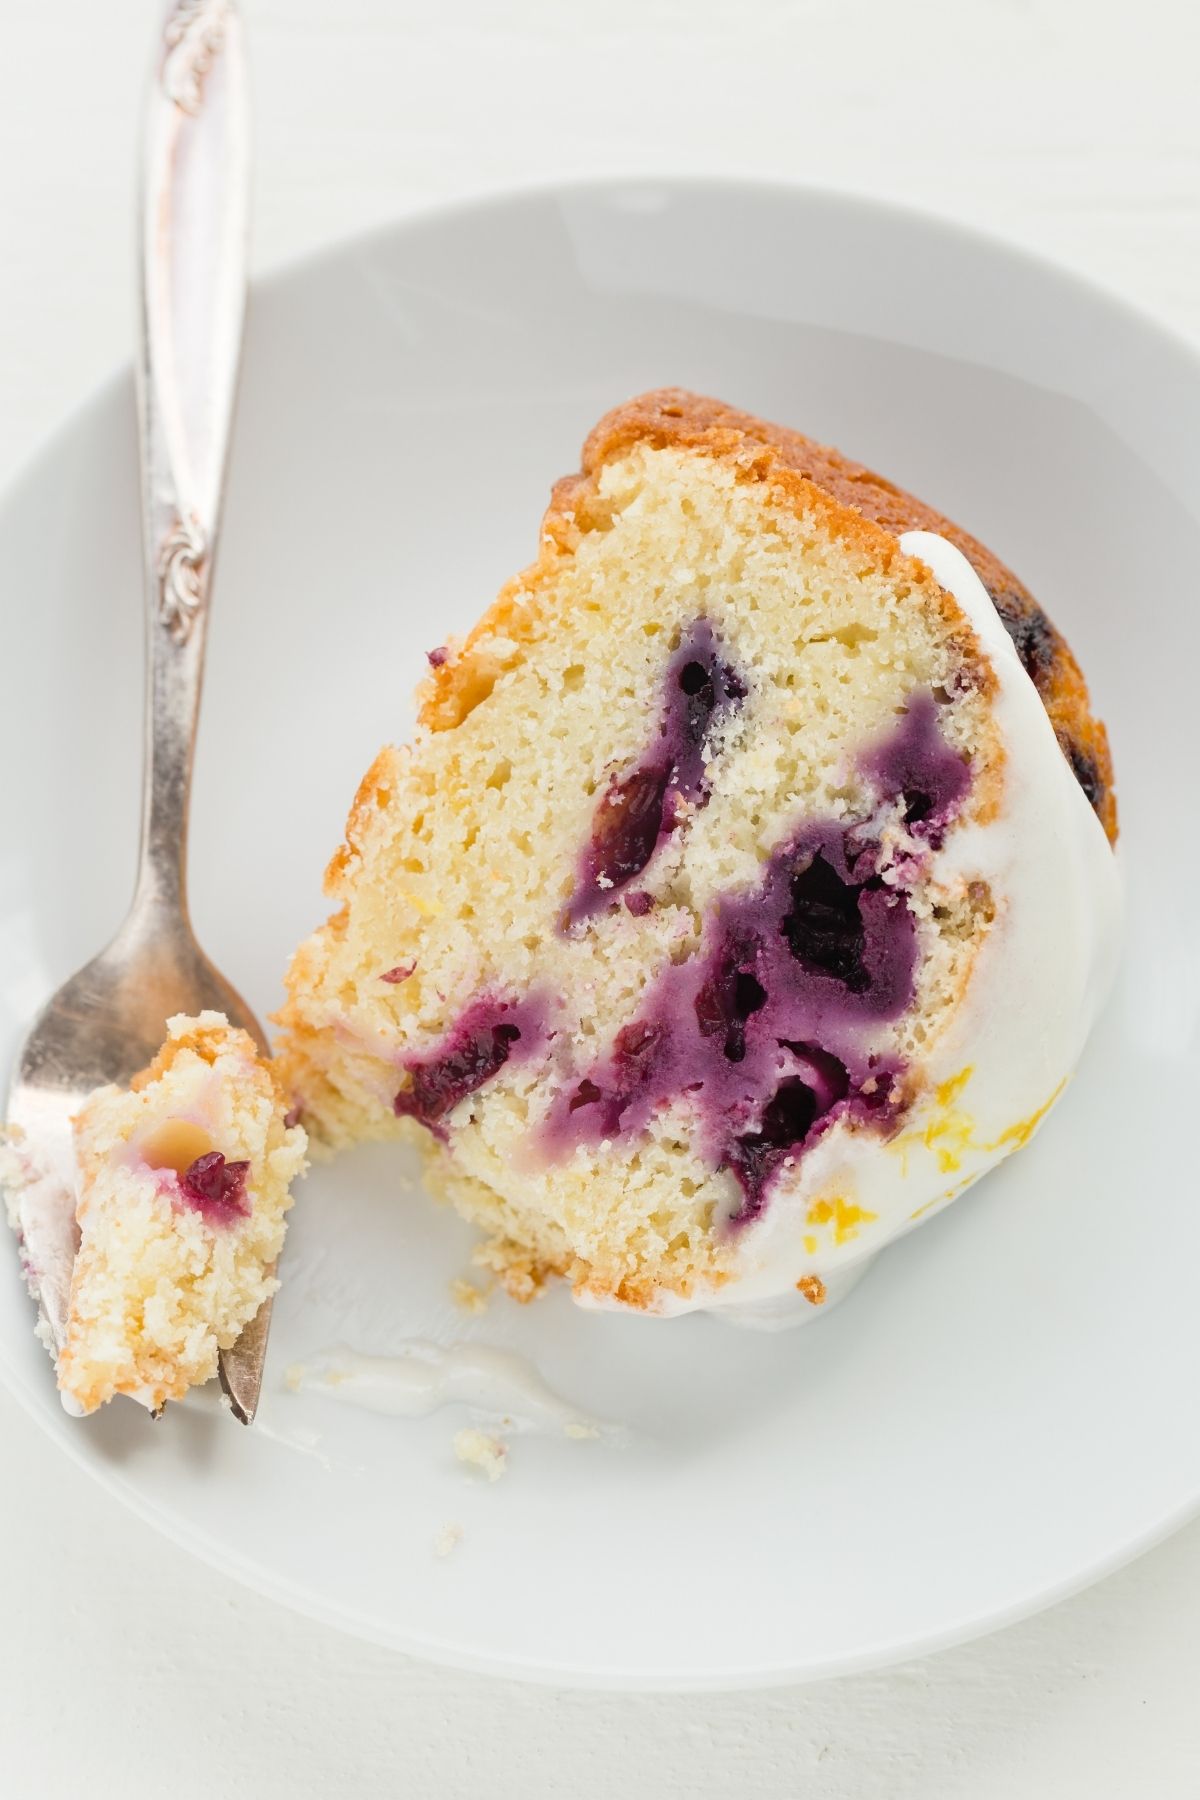 lemon blueberry bundt cake slice on a white plate with a fork taking a bite out